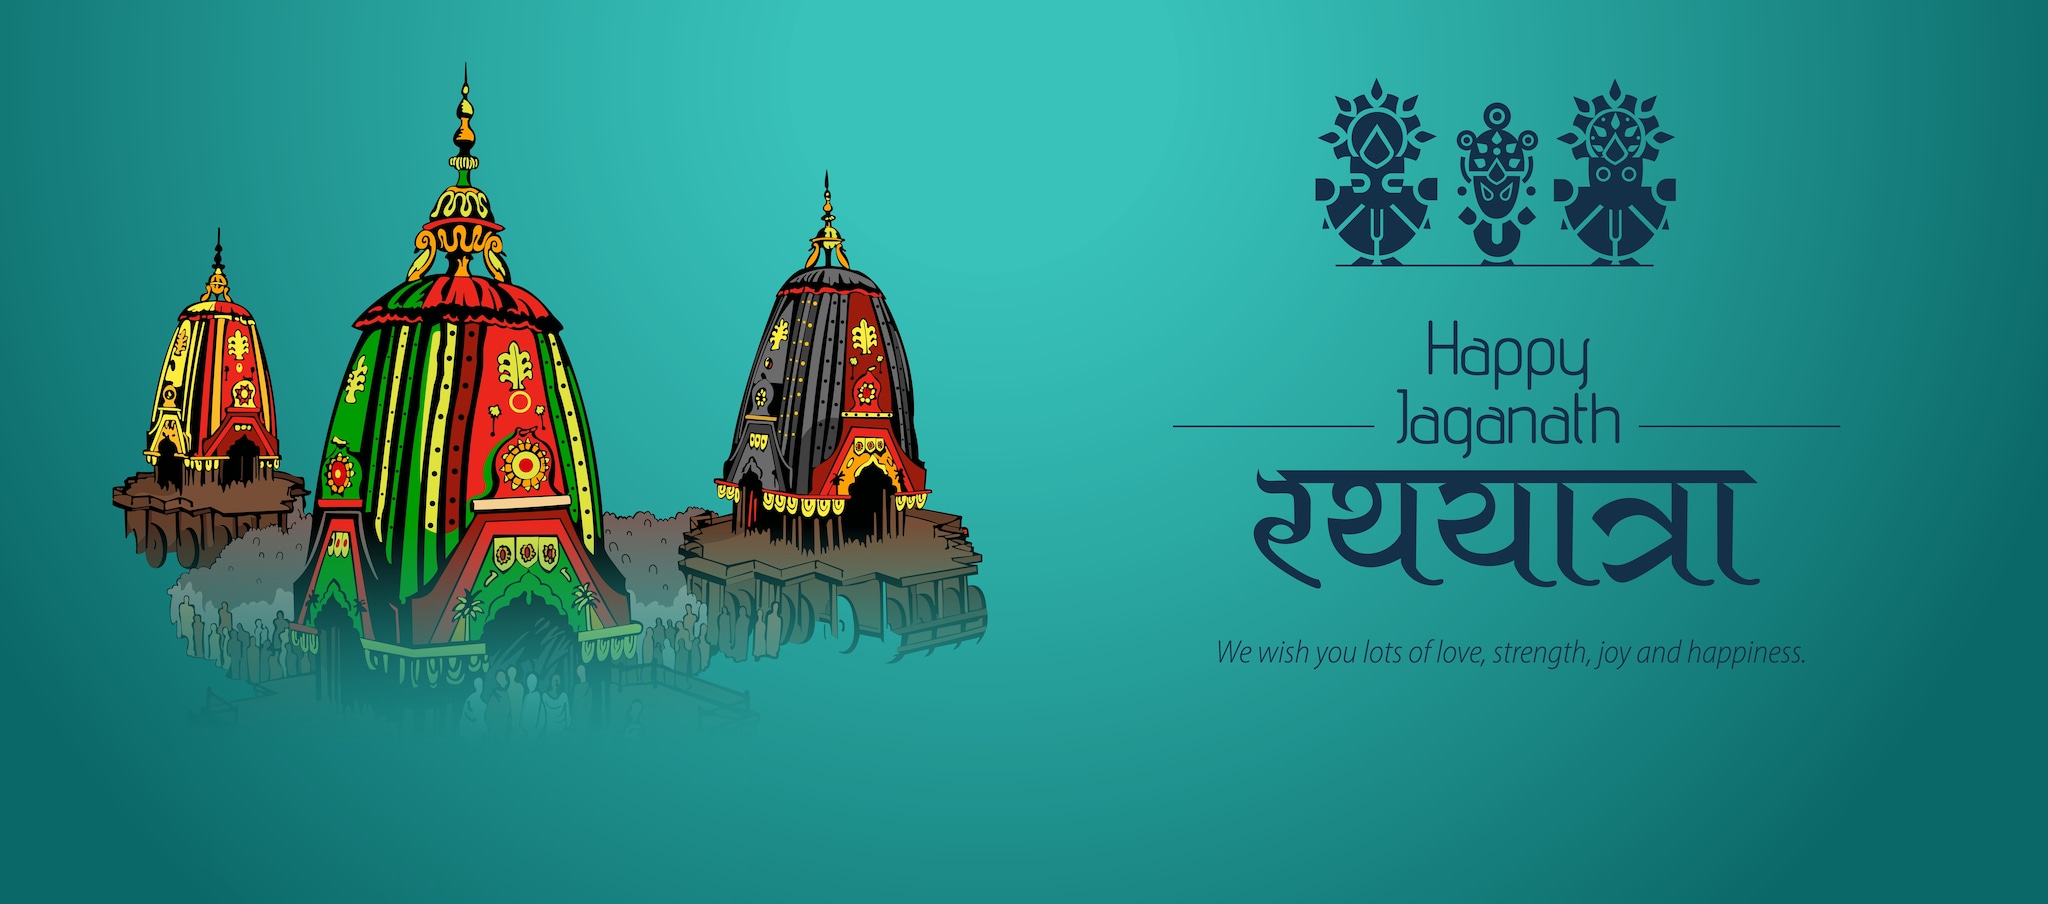 Happy Jagannath Rath Yatra 2022: Wishes Images, Quotes, Photos, Pics, Facebook SMS and Messages to share with your loved ones. (Image: Shutterstock)